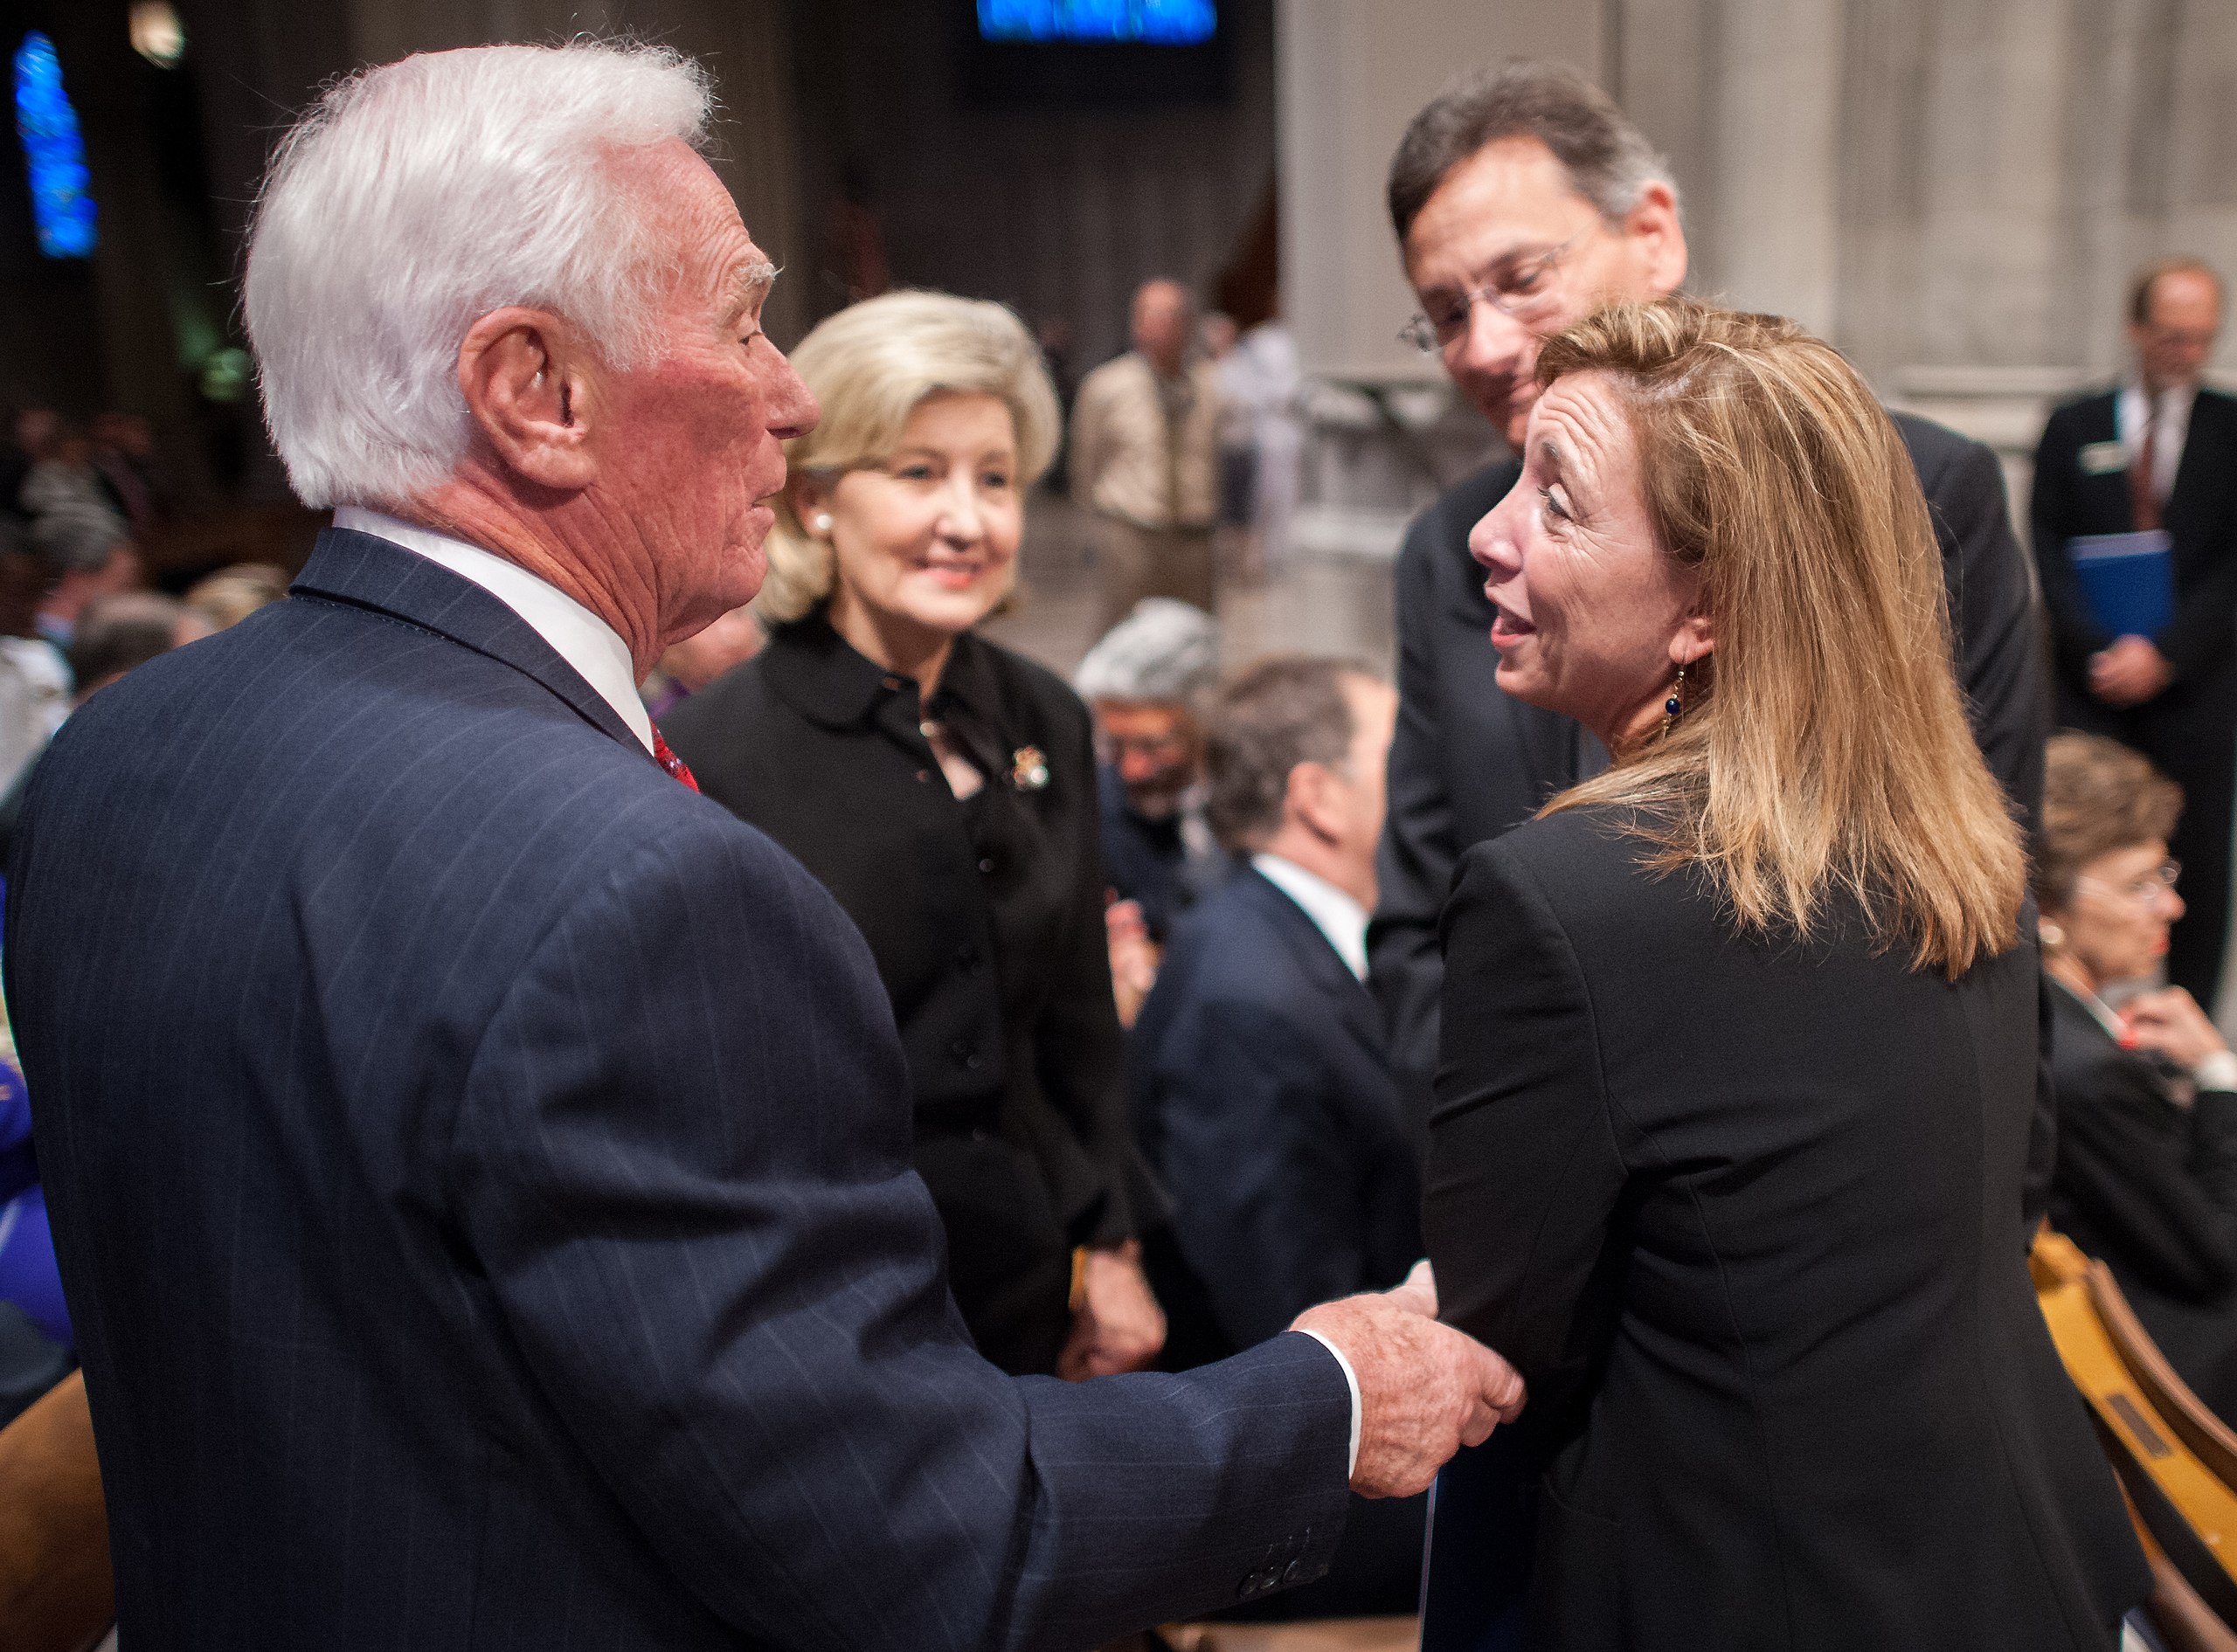 Apollo 17 mission commander Gene Cernan, left, the last man to walk on the moon, speaks with NASA Deputy Administrator Lori Garver, right, as U.S. Senator Kay Bailey Hutchison, R-Texas, centre, looks on prior to a memorial service celebrating the life of Neil Armstrong, on Thursday, 13 September 2012, at the Washington National Cathedral.